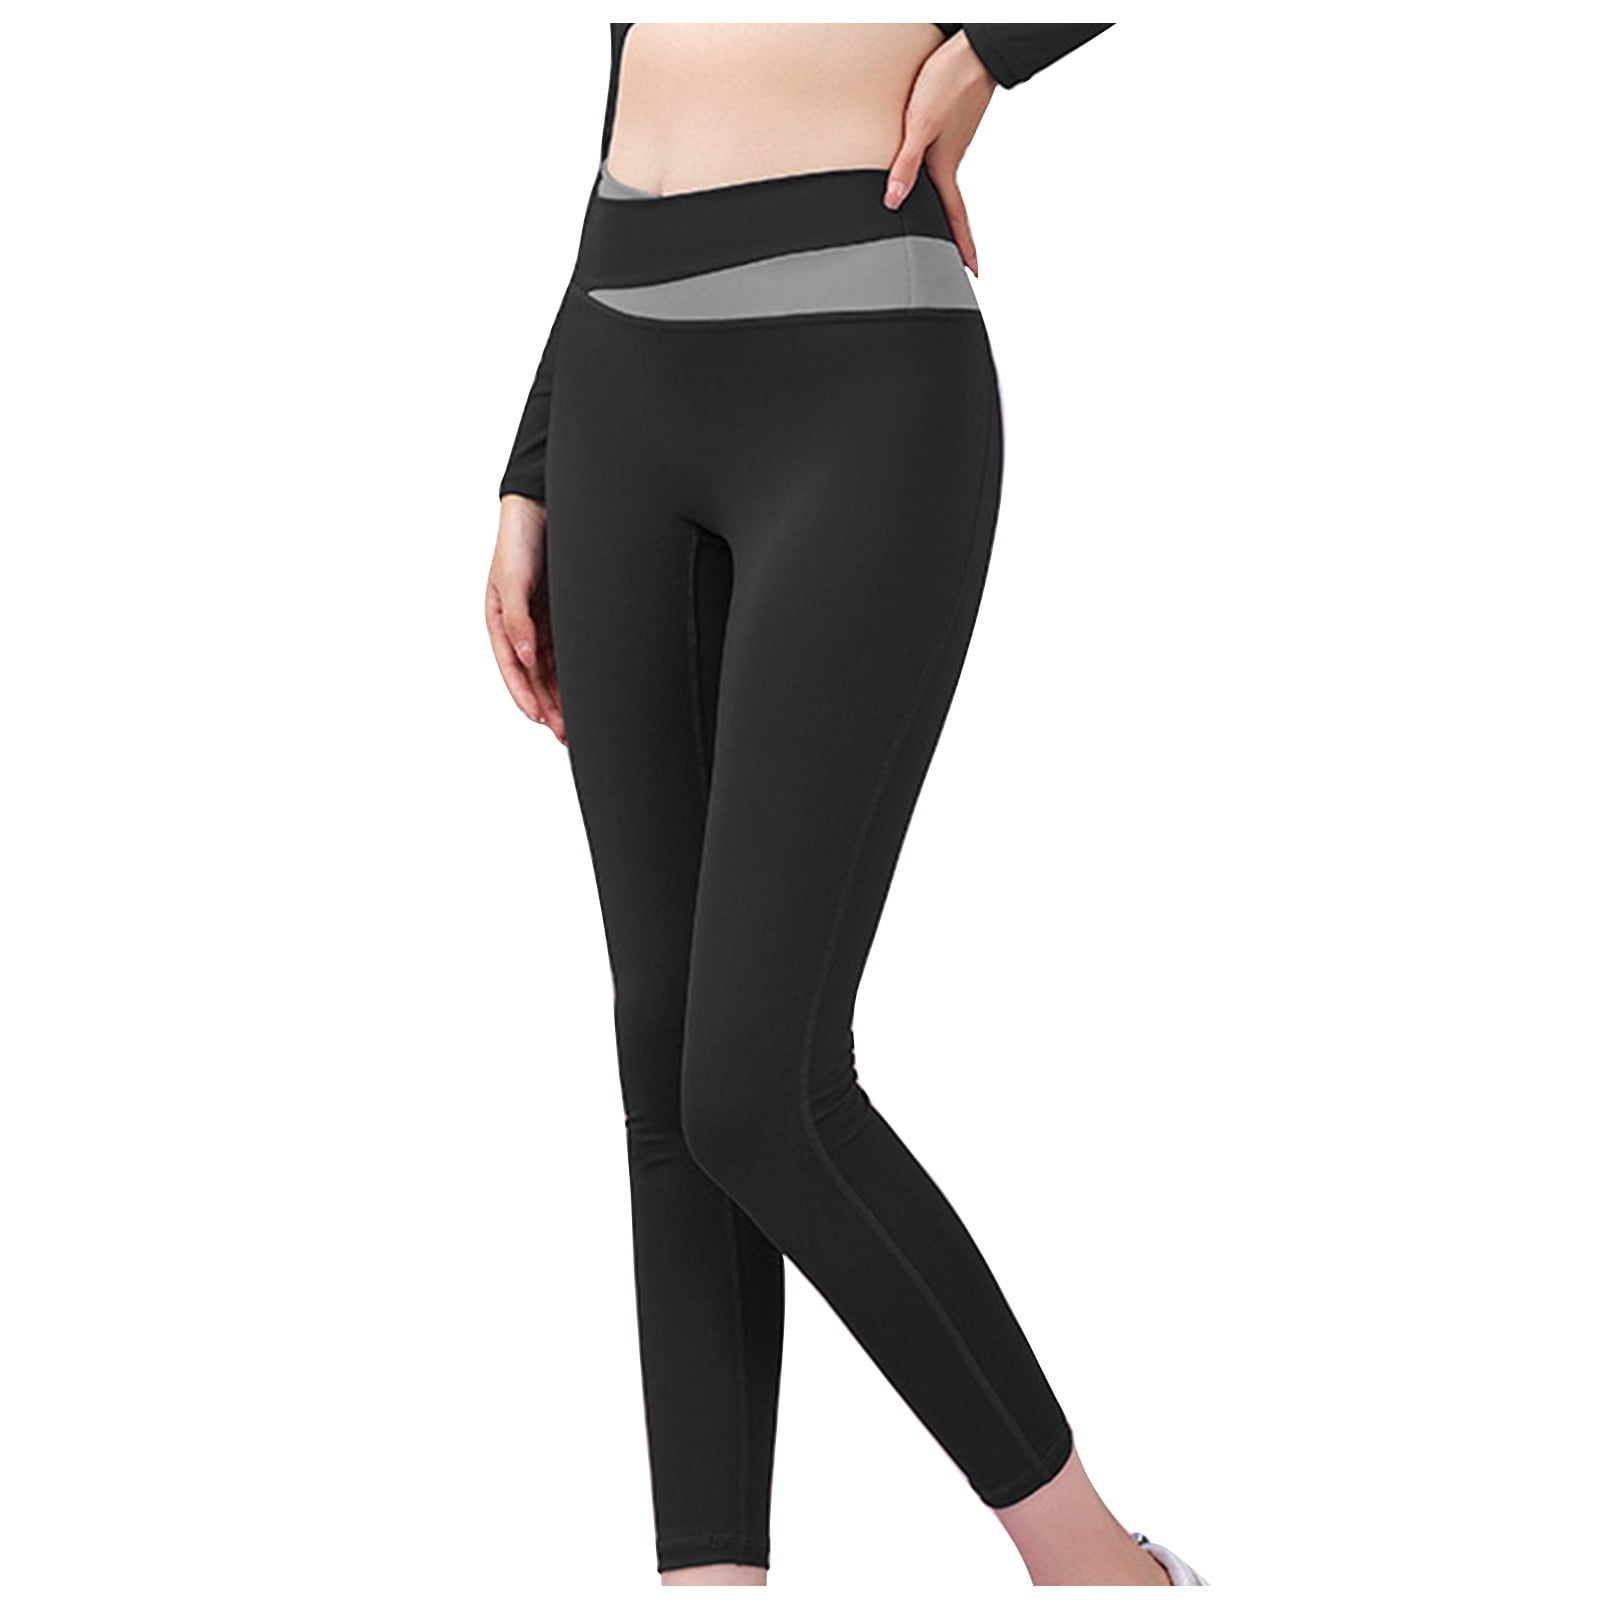 SELONE High Waisted Leggings for Women Workout Butt Lifting Gym Jumpsuits  Long Length High Waist Sports Yogalicious Utility Dressy Everyday Soft